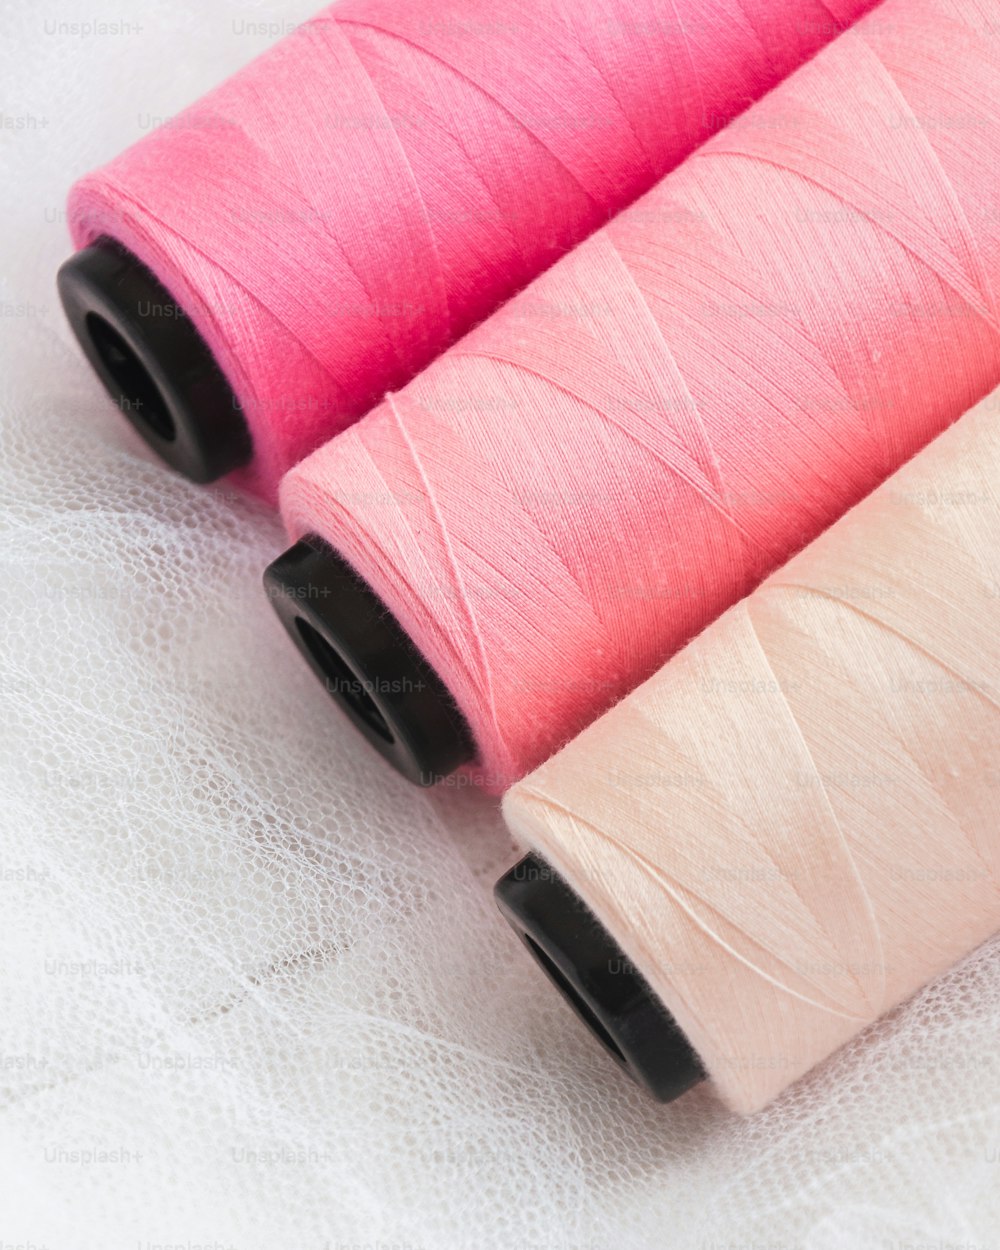 three spools of thread sitting next to each other